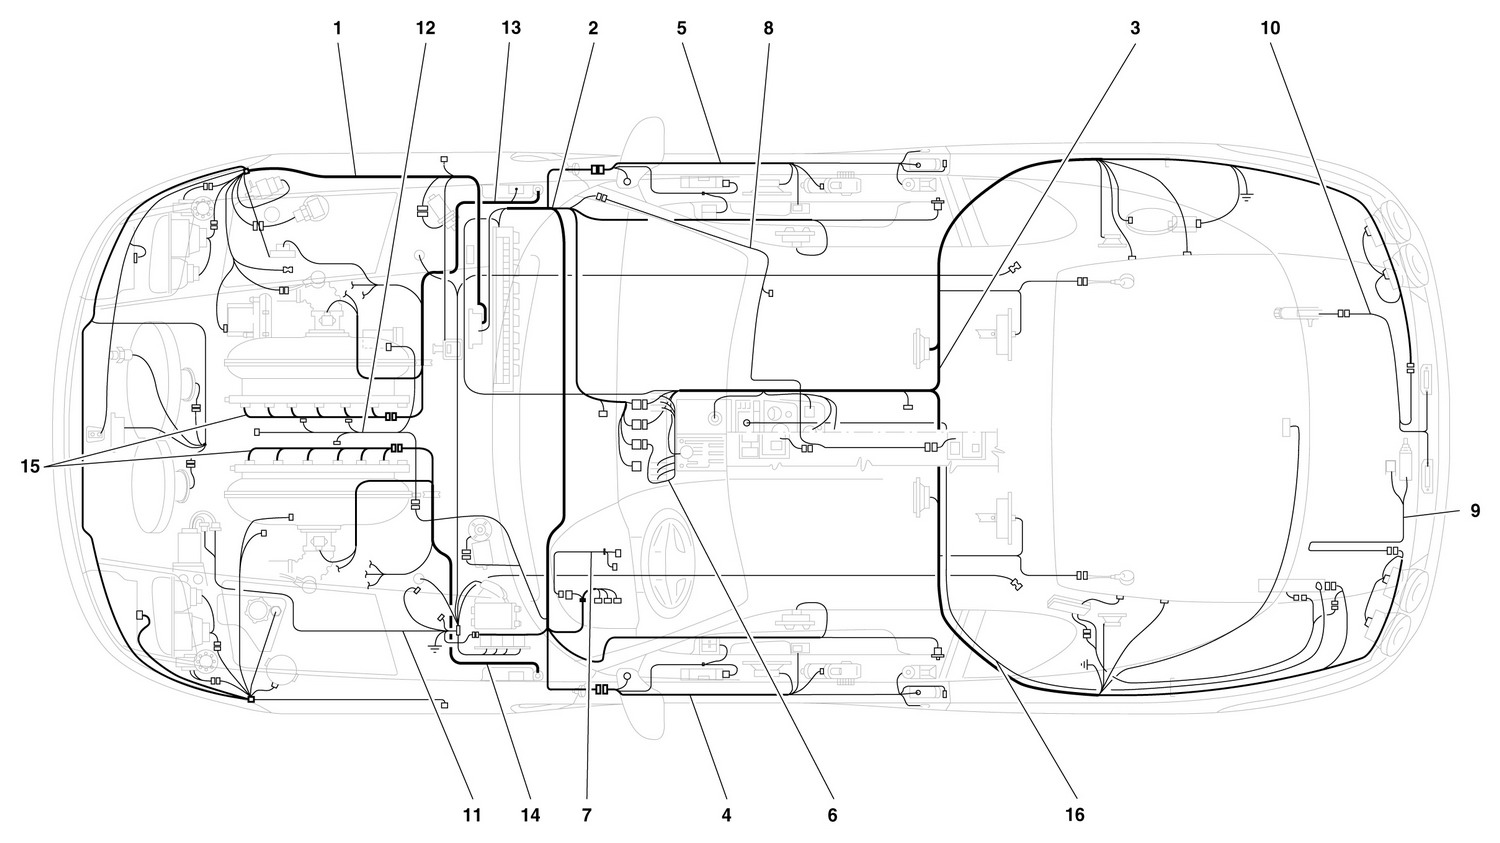 Schematic: Electrical System -Not For 456 Gta